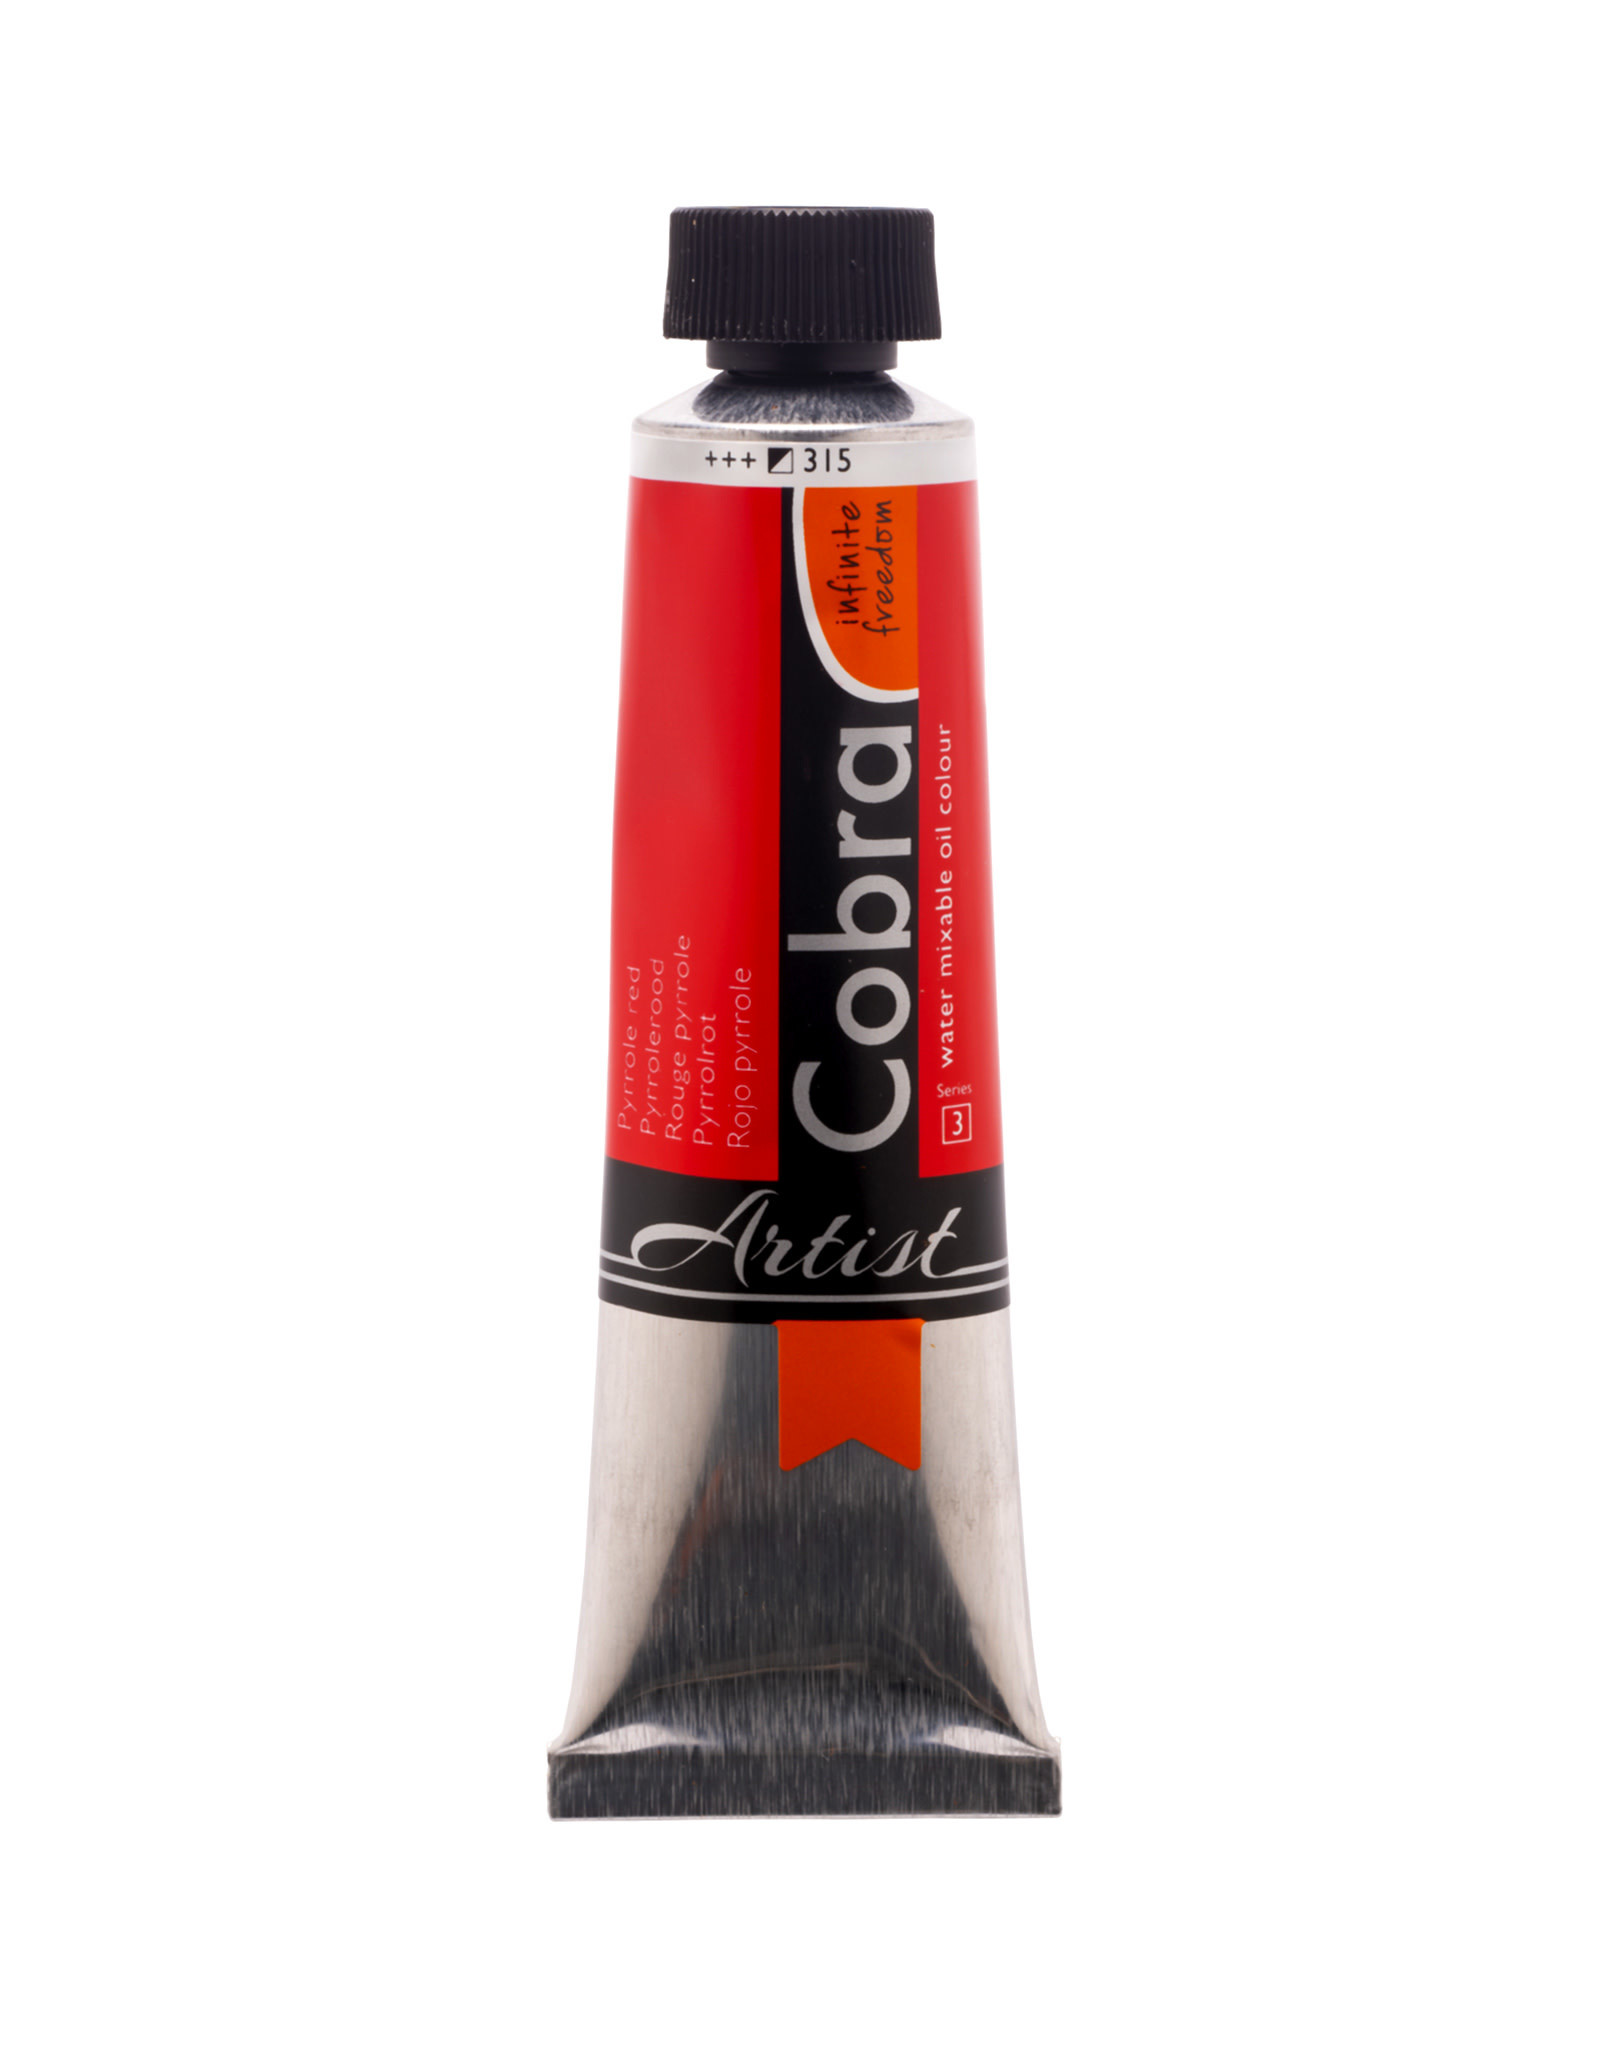 Royal Talens Cobra Water Mixable Artist Oils, Pyrrole Red 40ml